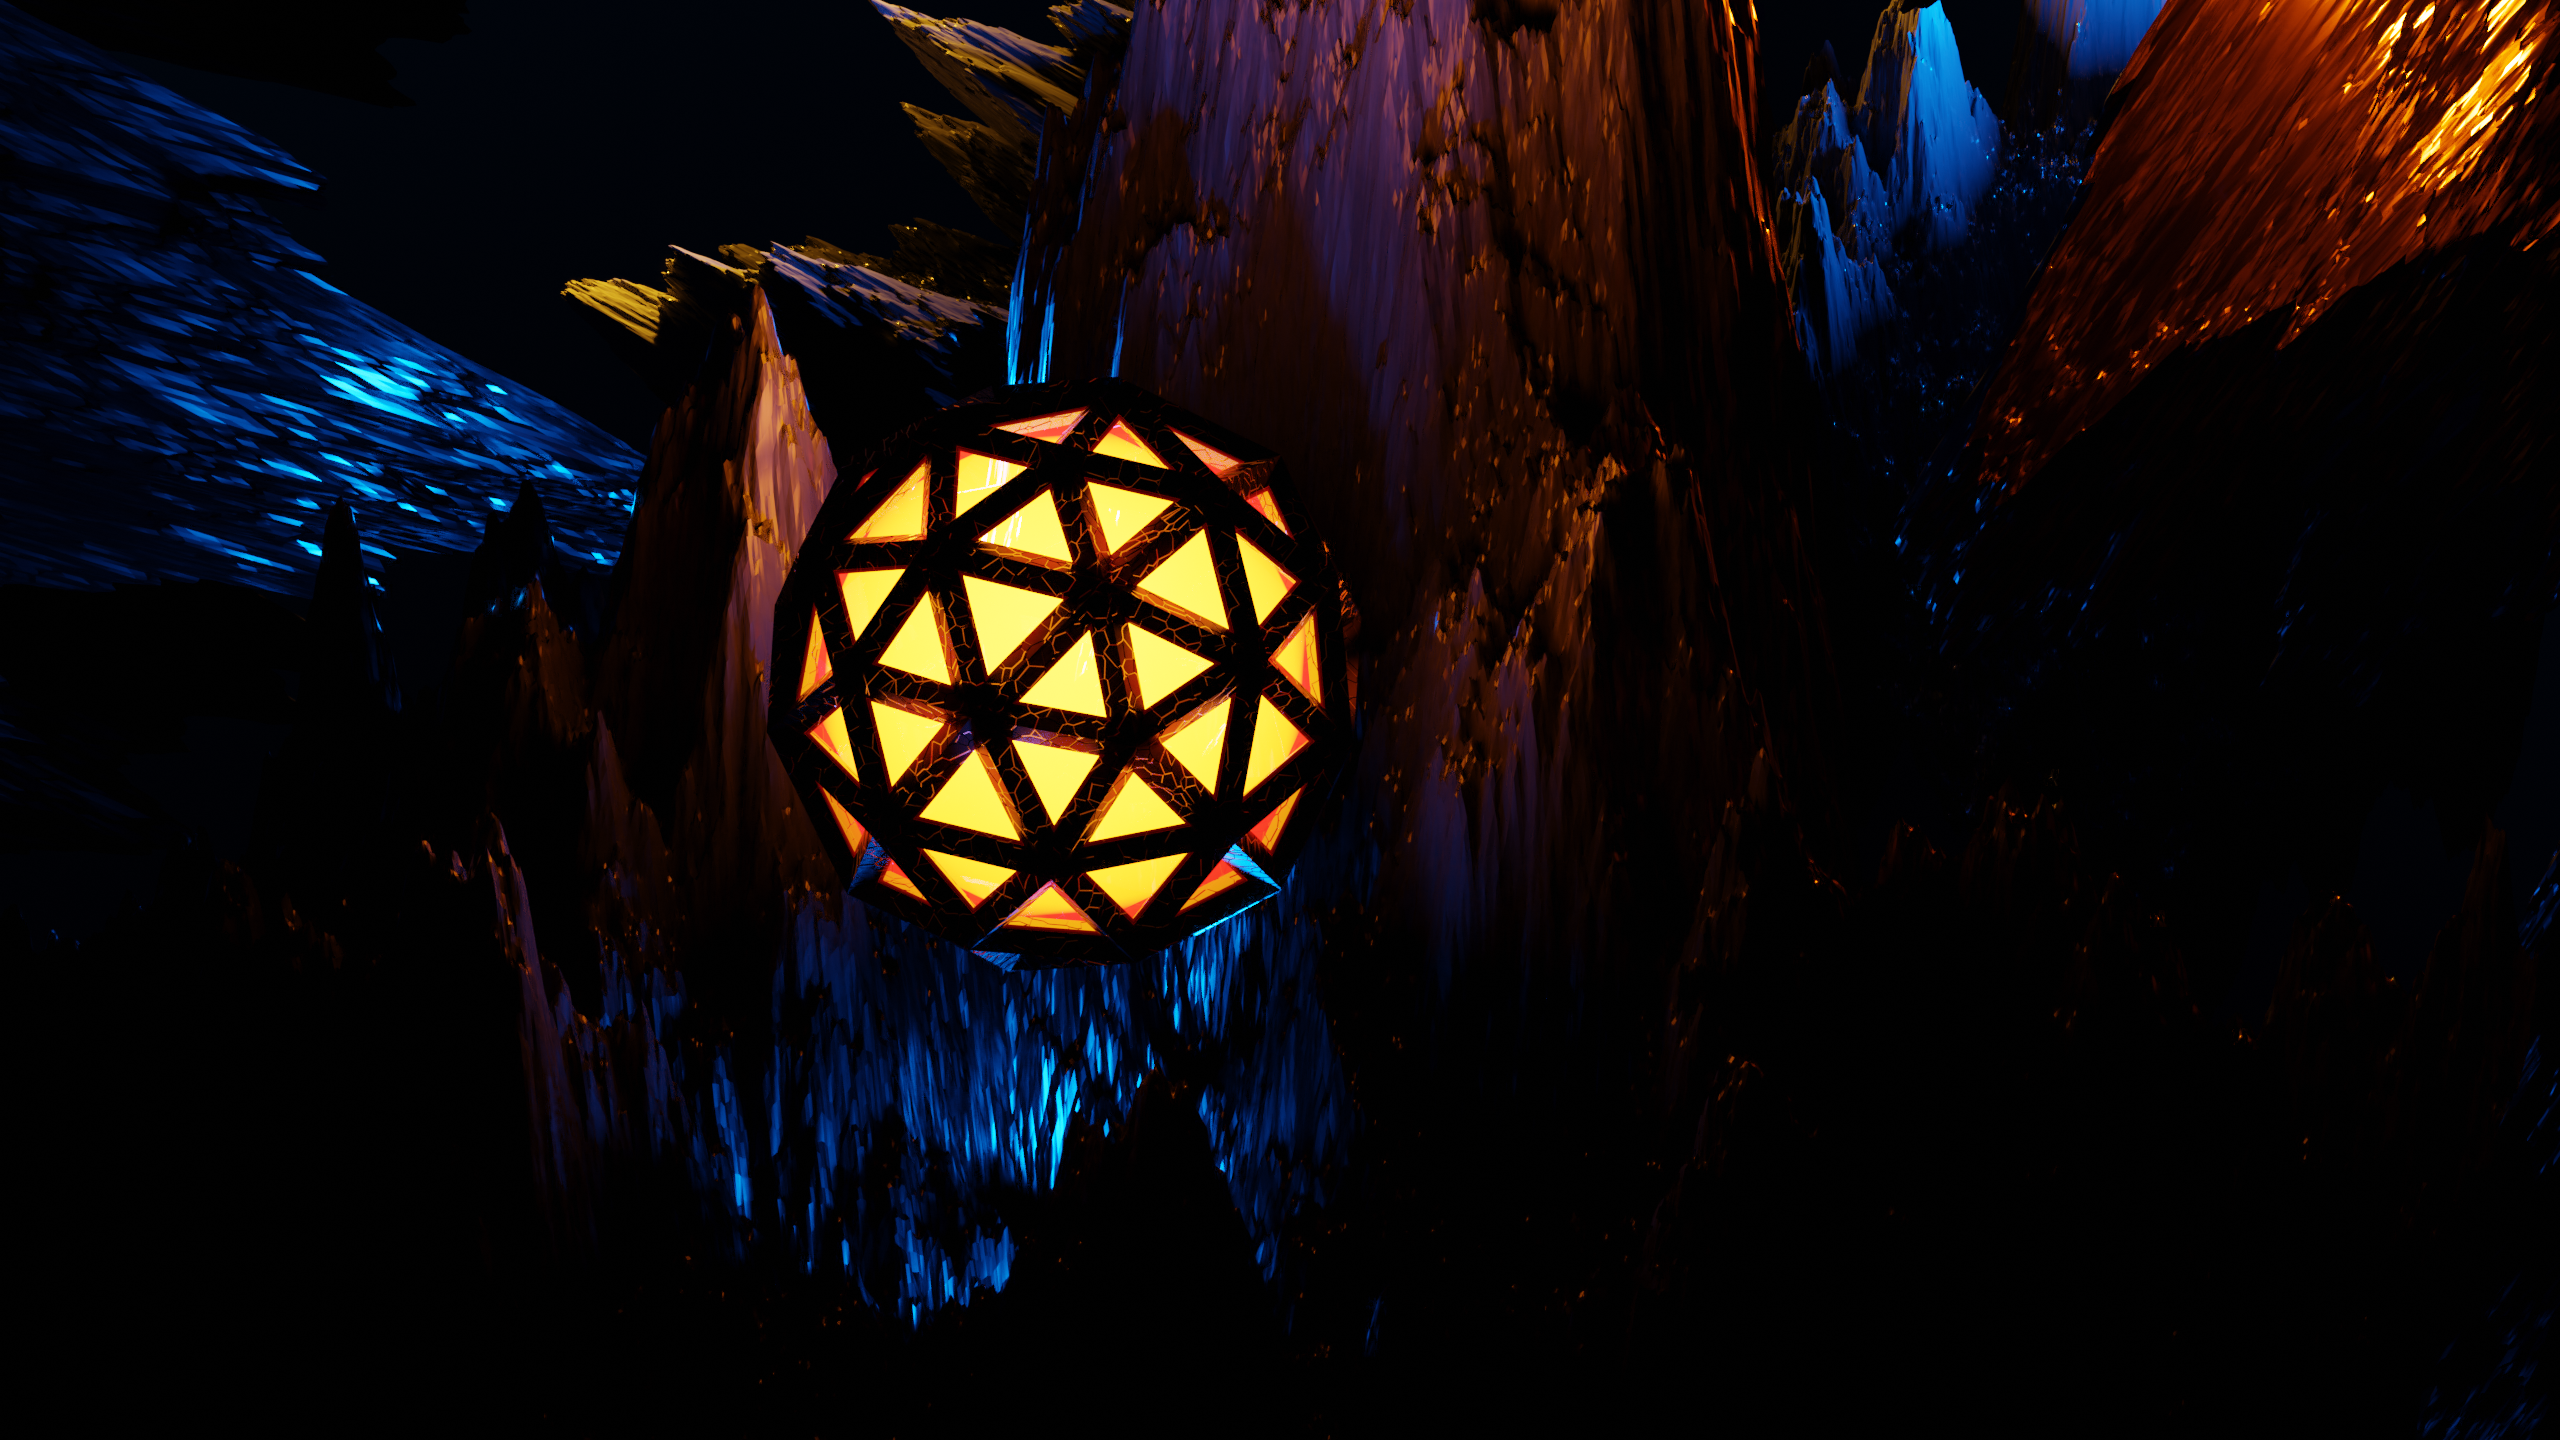 General 2560x1440 3D Abstract Blender science fiction space alien orb abstract digital art